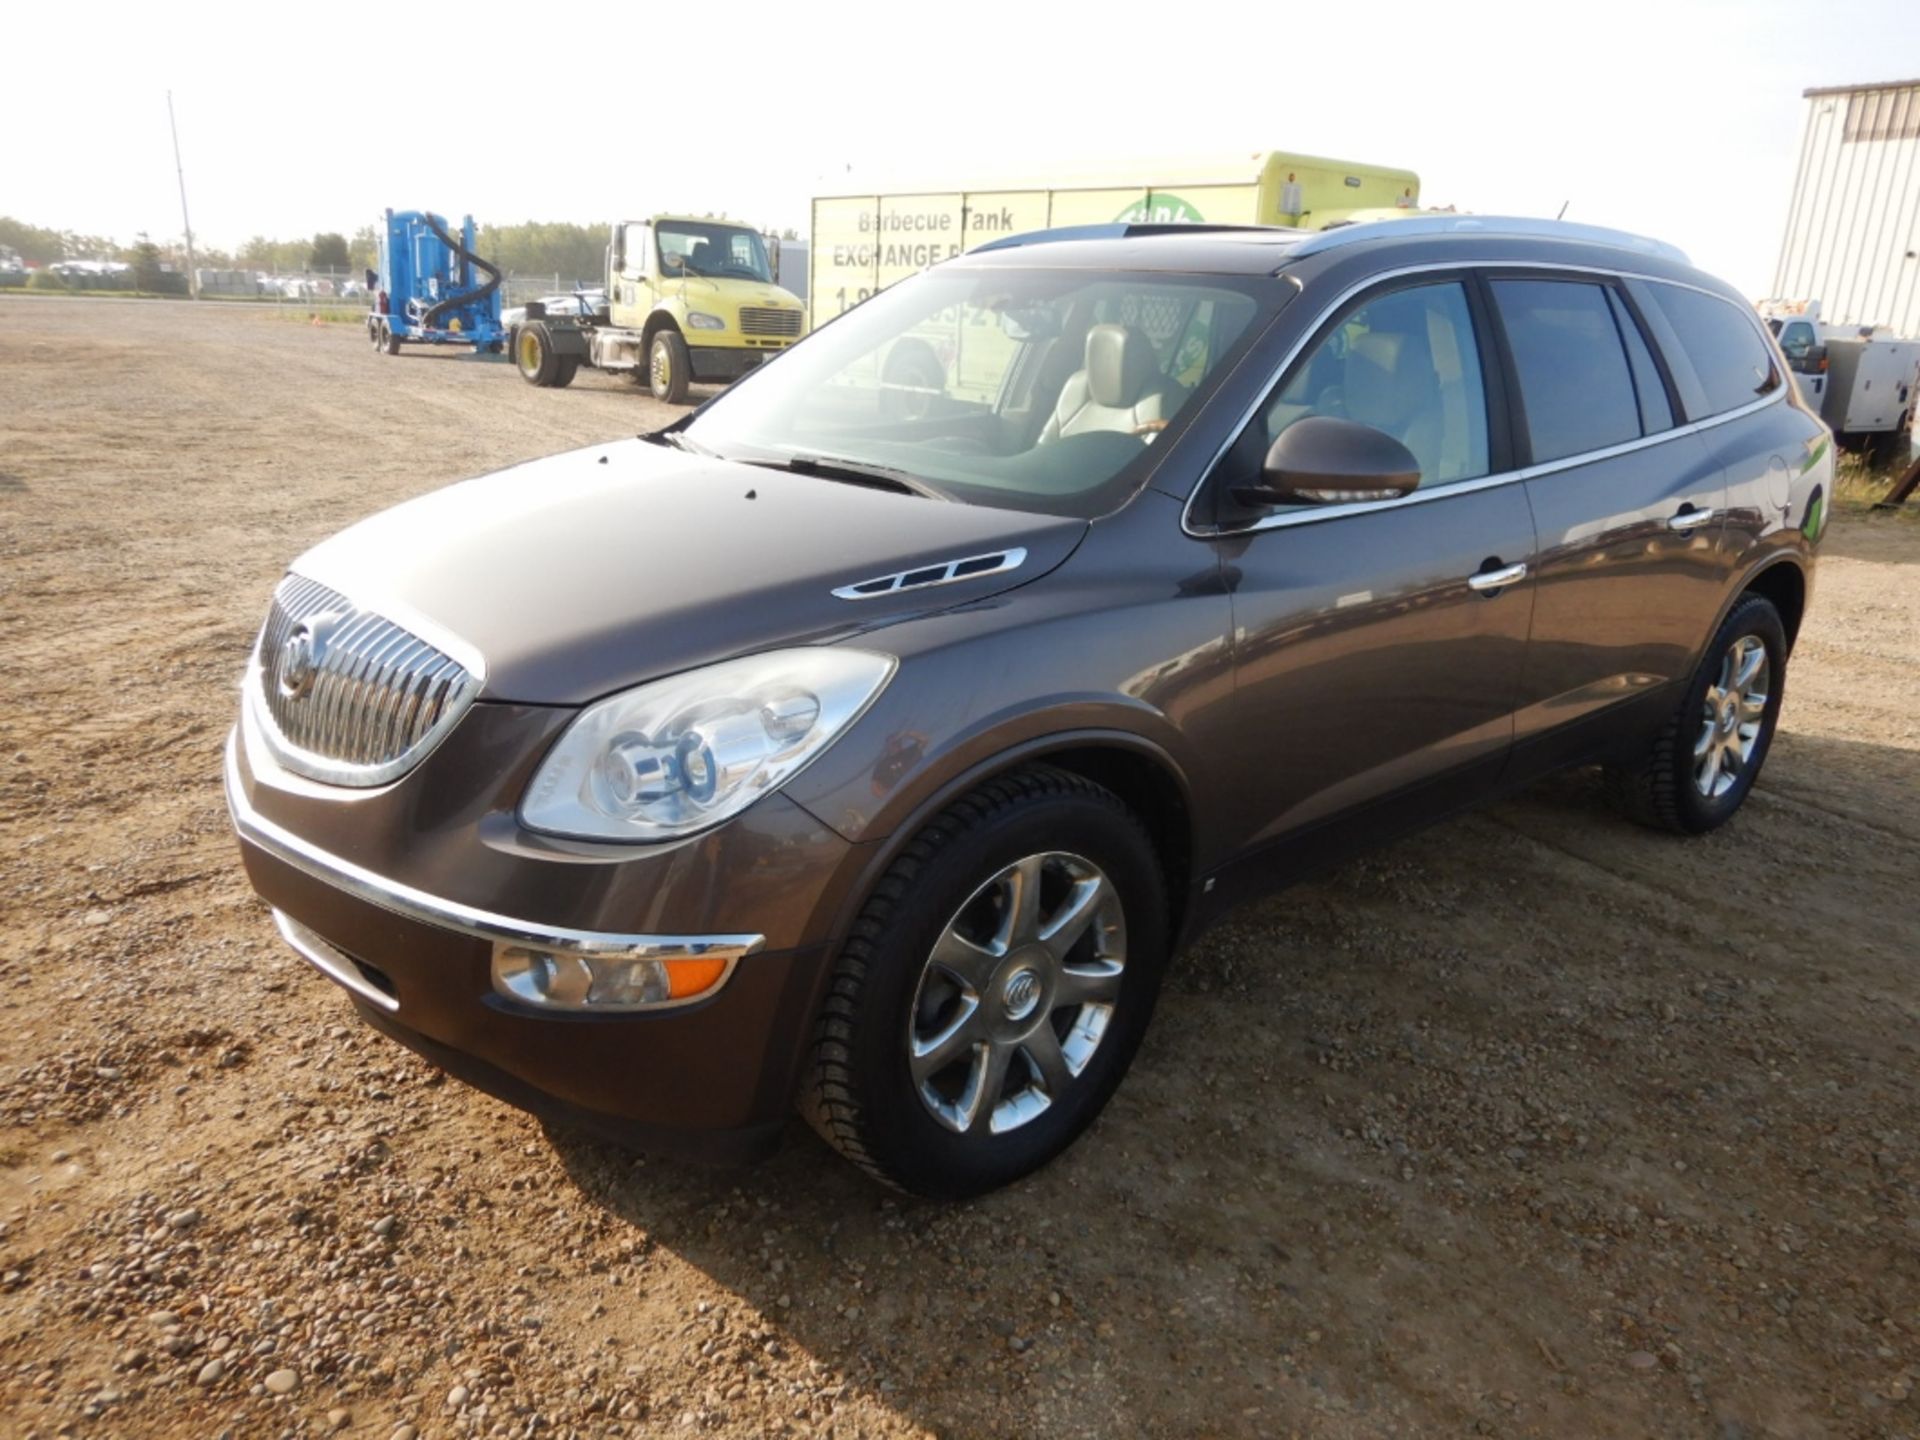 2010 BUICK ENCLAVE CXL SUV 7 PASSENGER, FULL LOAD, 165,300 KM SHOWING, S/N 5GALVCED7AJ123531 - Image 2 of 11